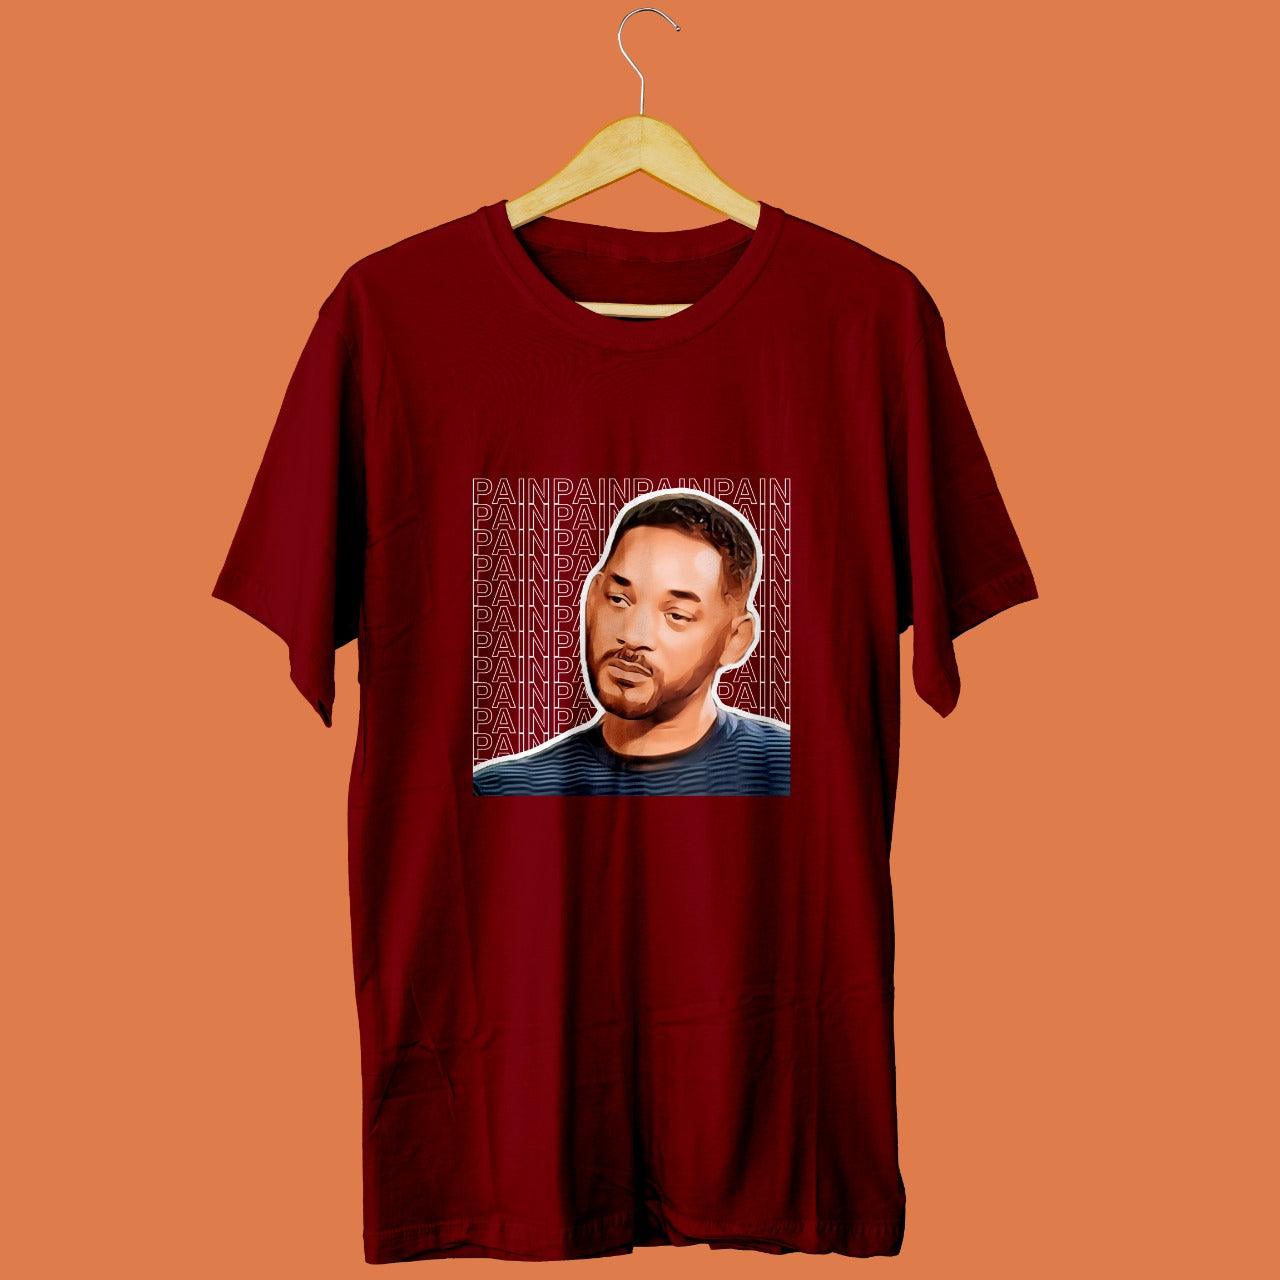 red tshirt with picture of sad will smith printed on it with pain written multiple times in the background, relatable memes